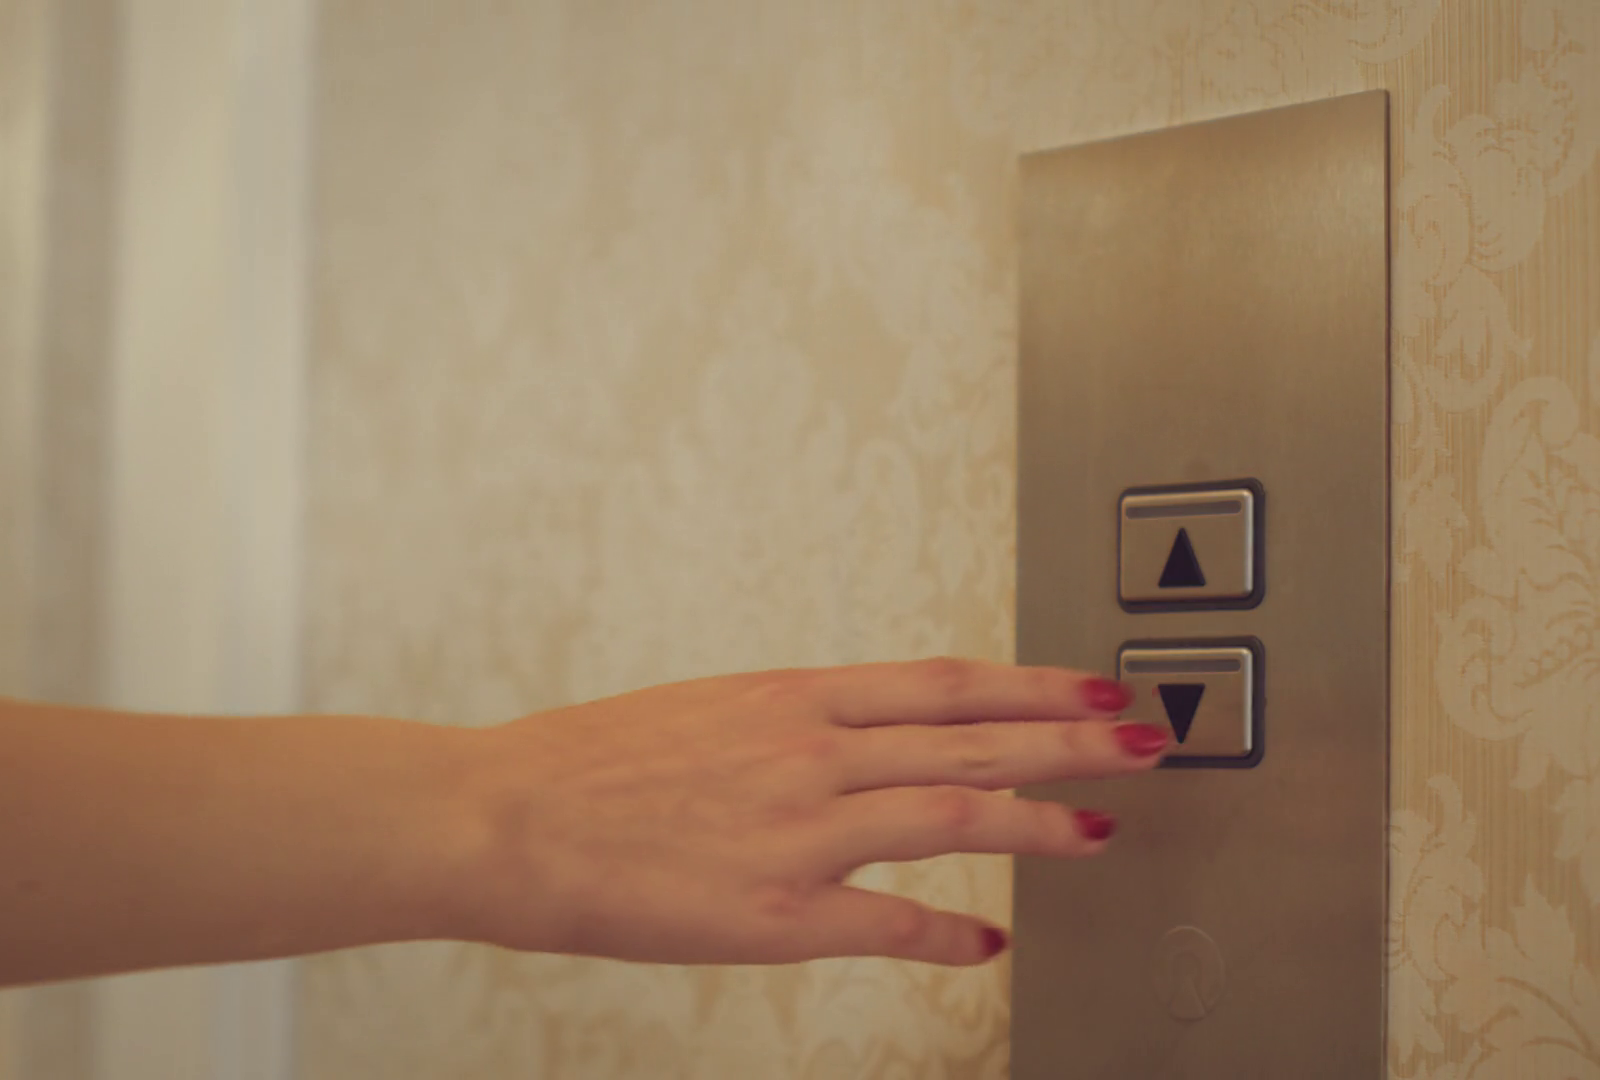 These Trick Questions Will Stump You Unless You’re Really, REALLY Intelligent lift up and down buttons